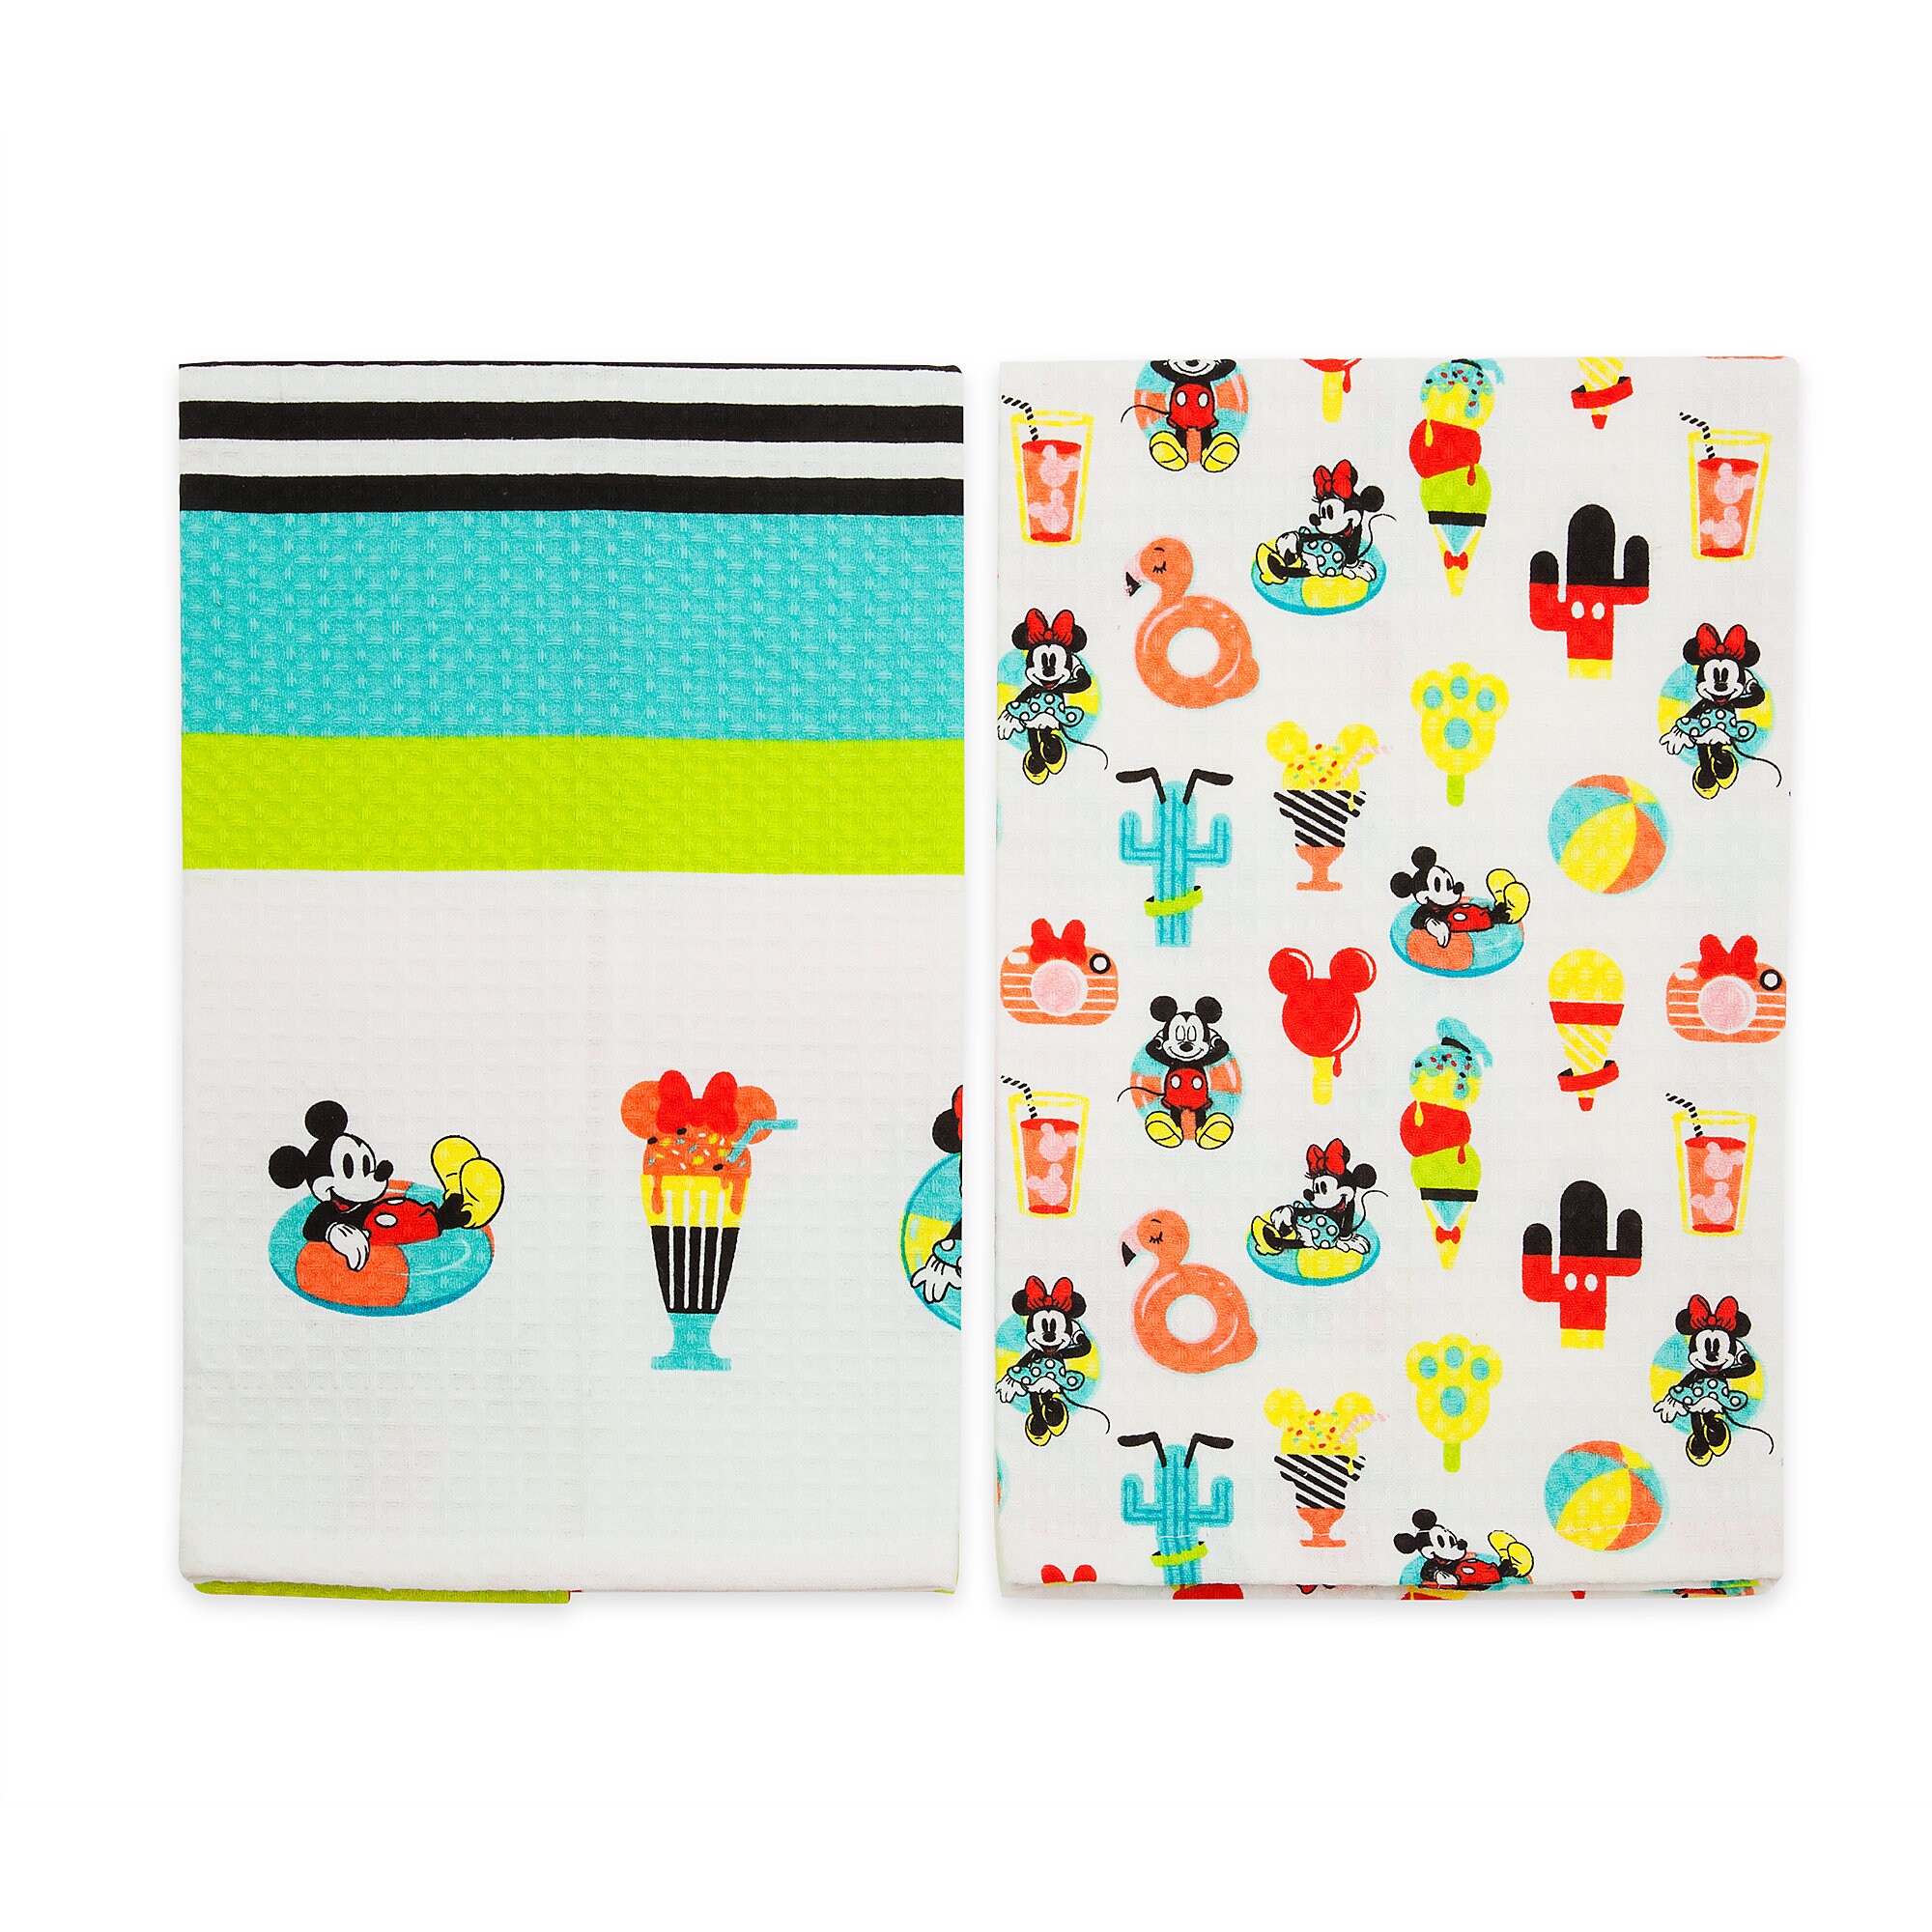 Mickey and Minnie Mouse Kitchen Towel Set - Disney Eats